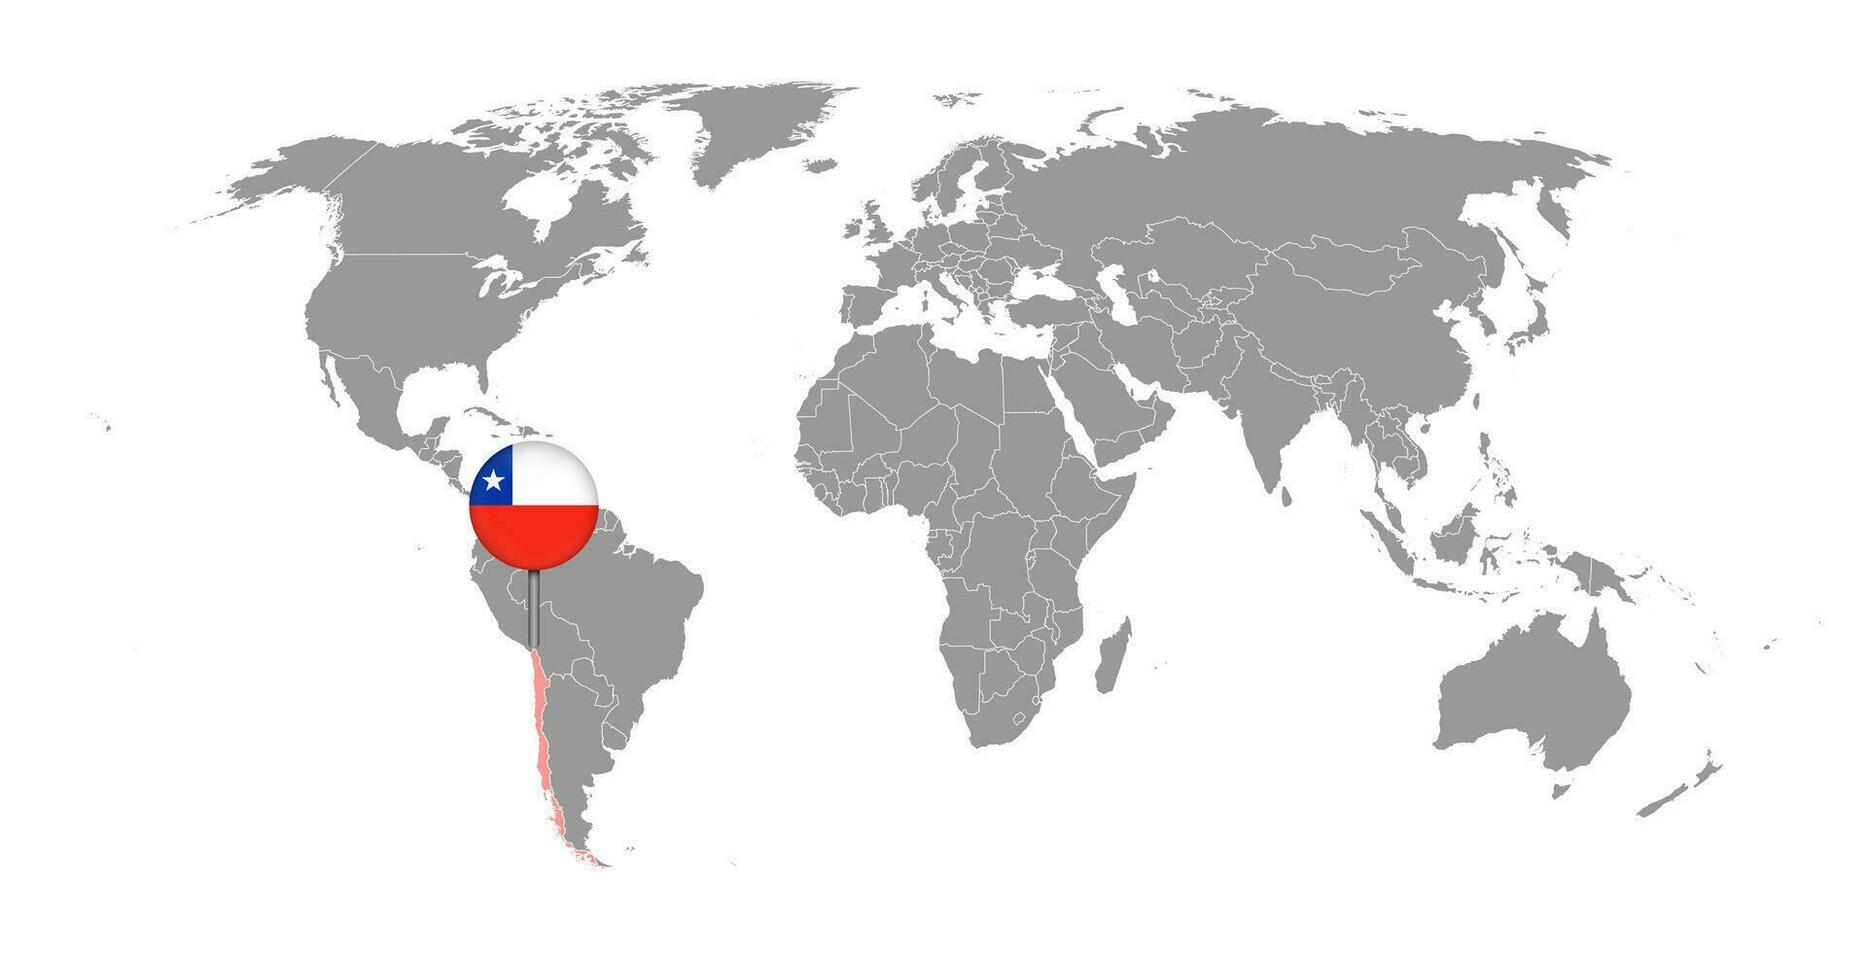 Pin map with Chile flag on world map. Vector illustration.